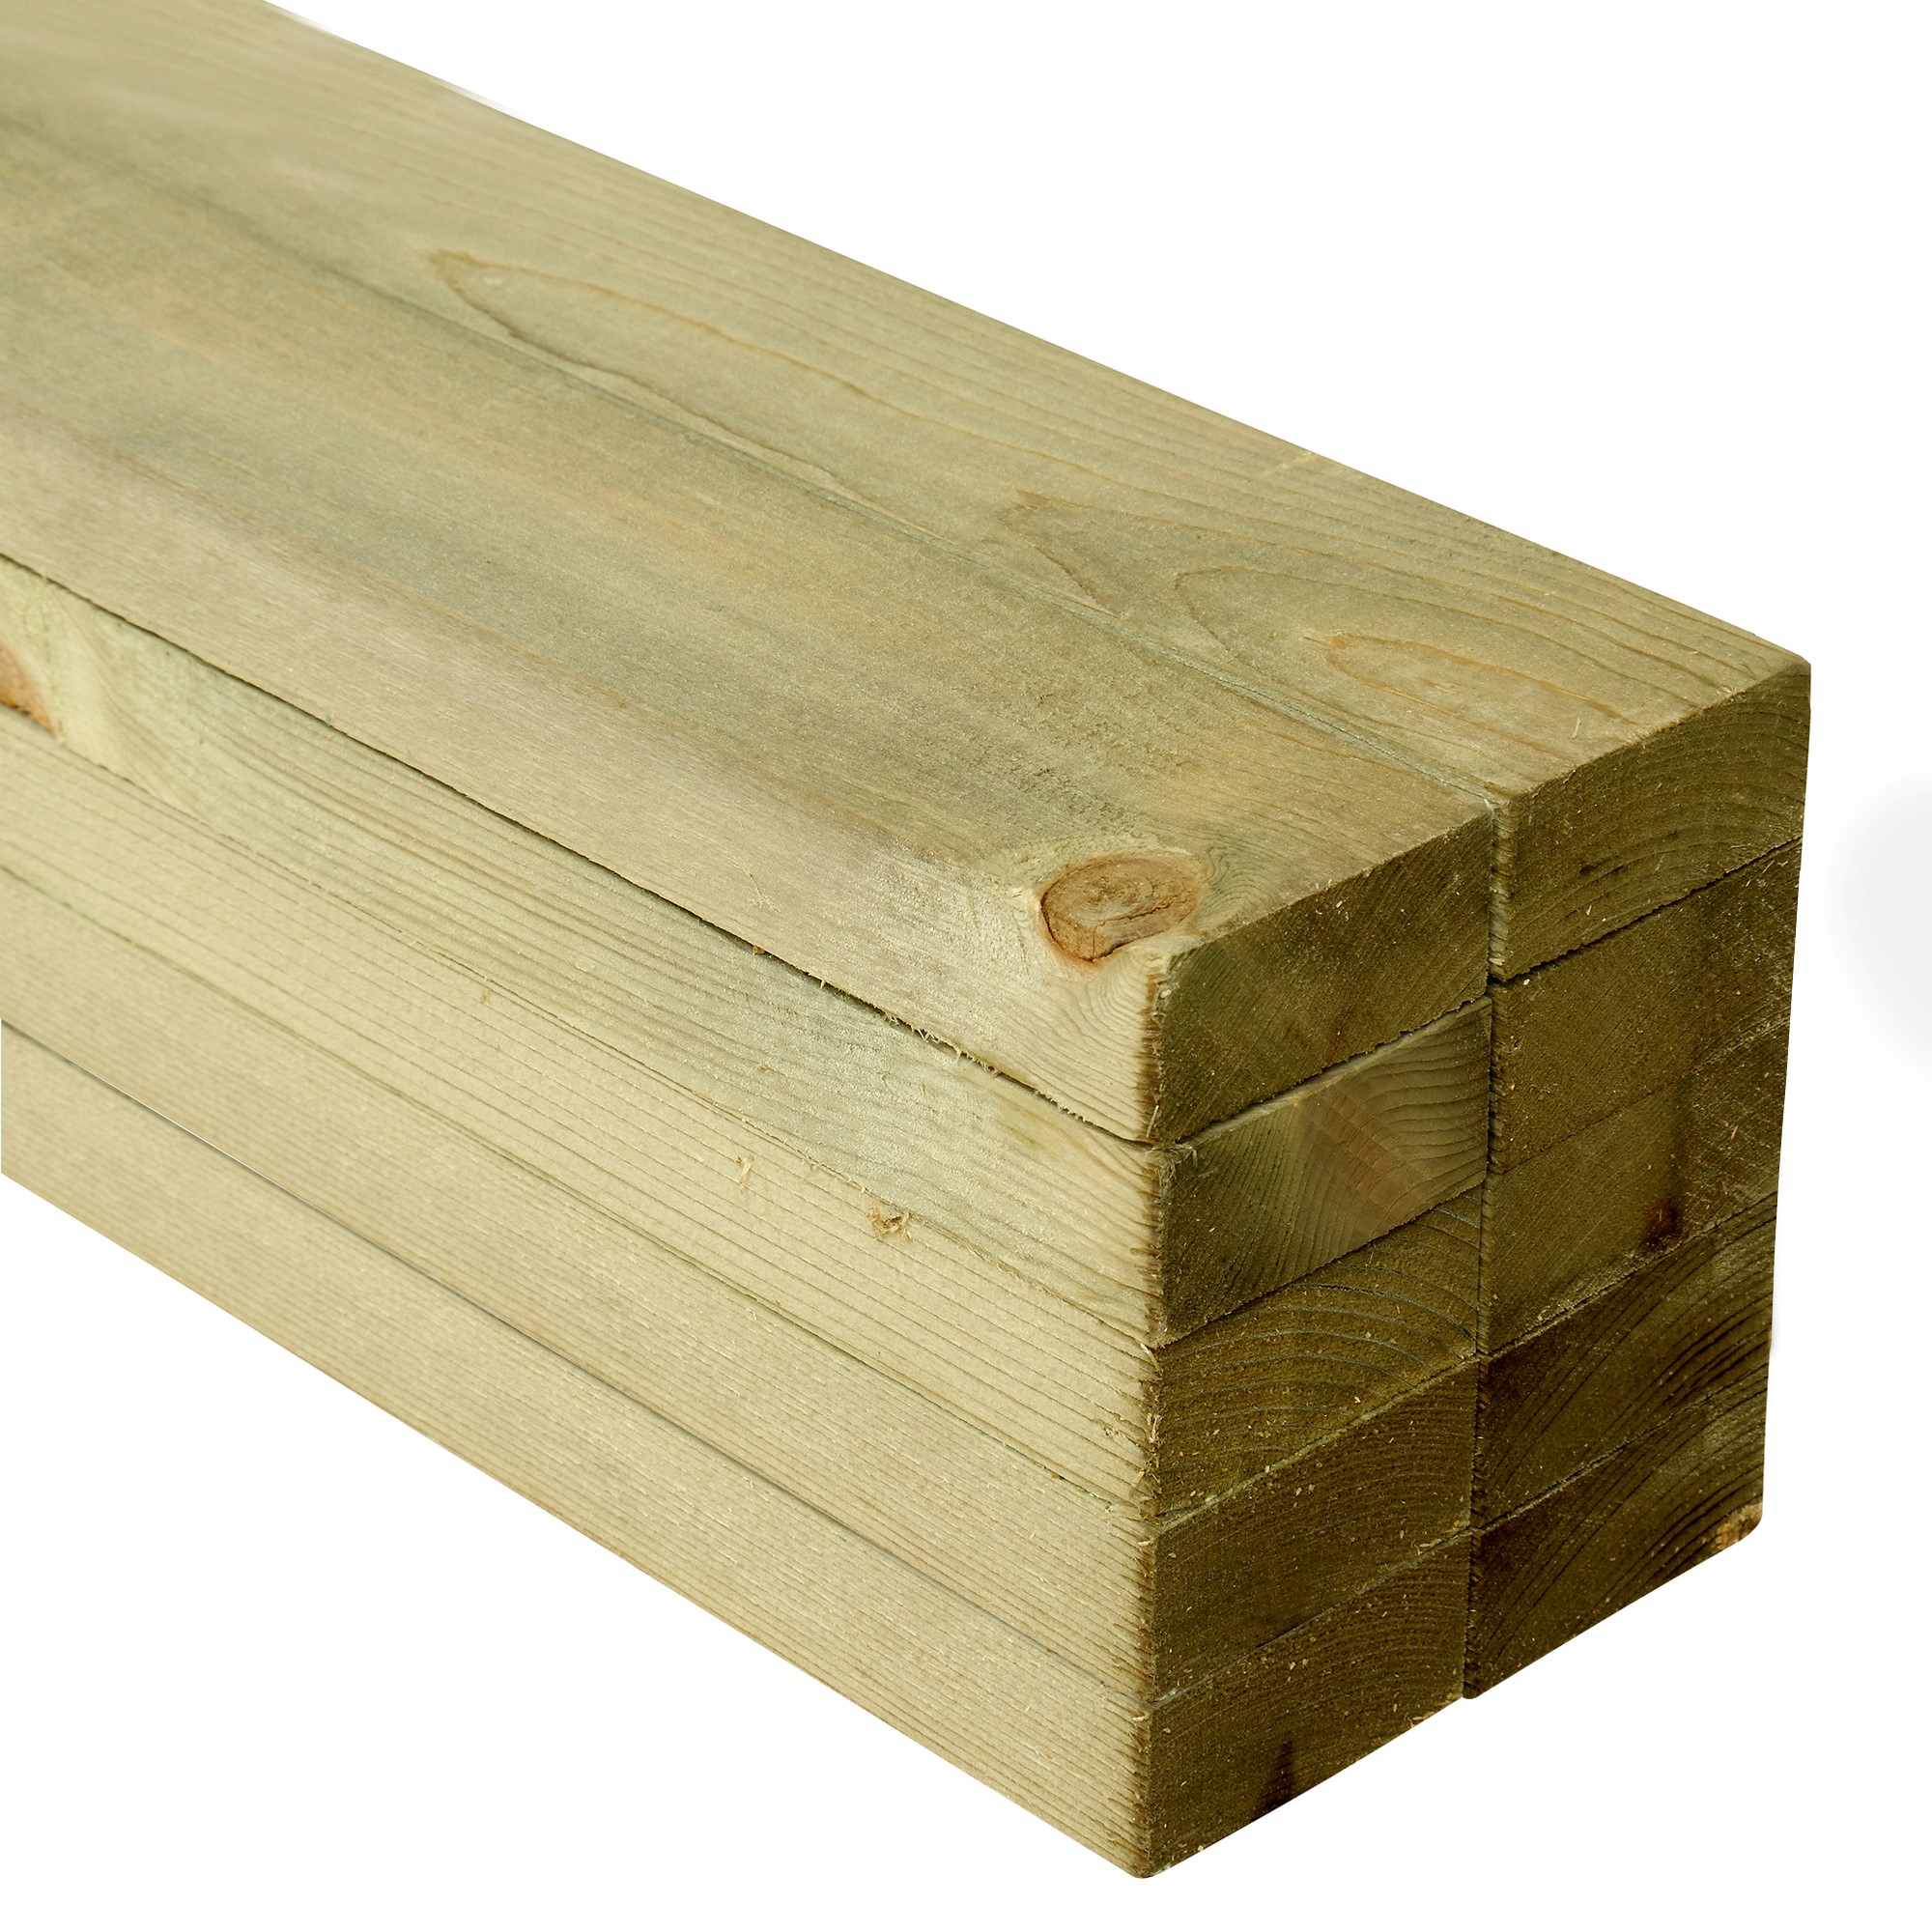 Image of Wickes Treated Sawn Timber - 22 x 47 x 2400mm - Pack of 10